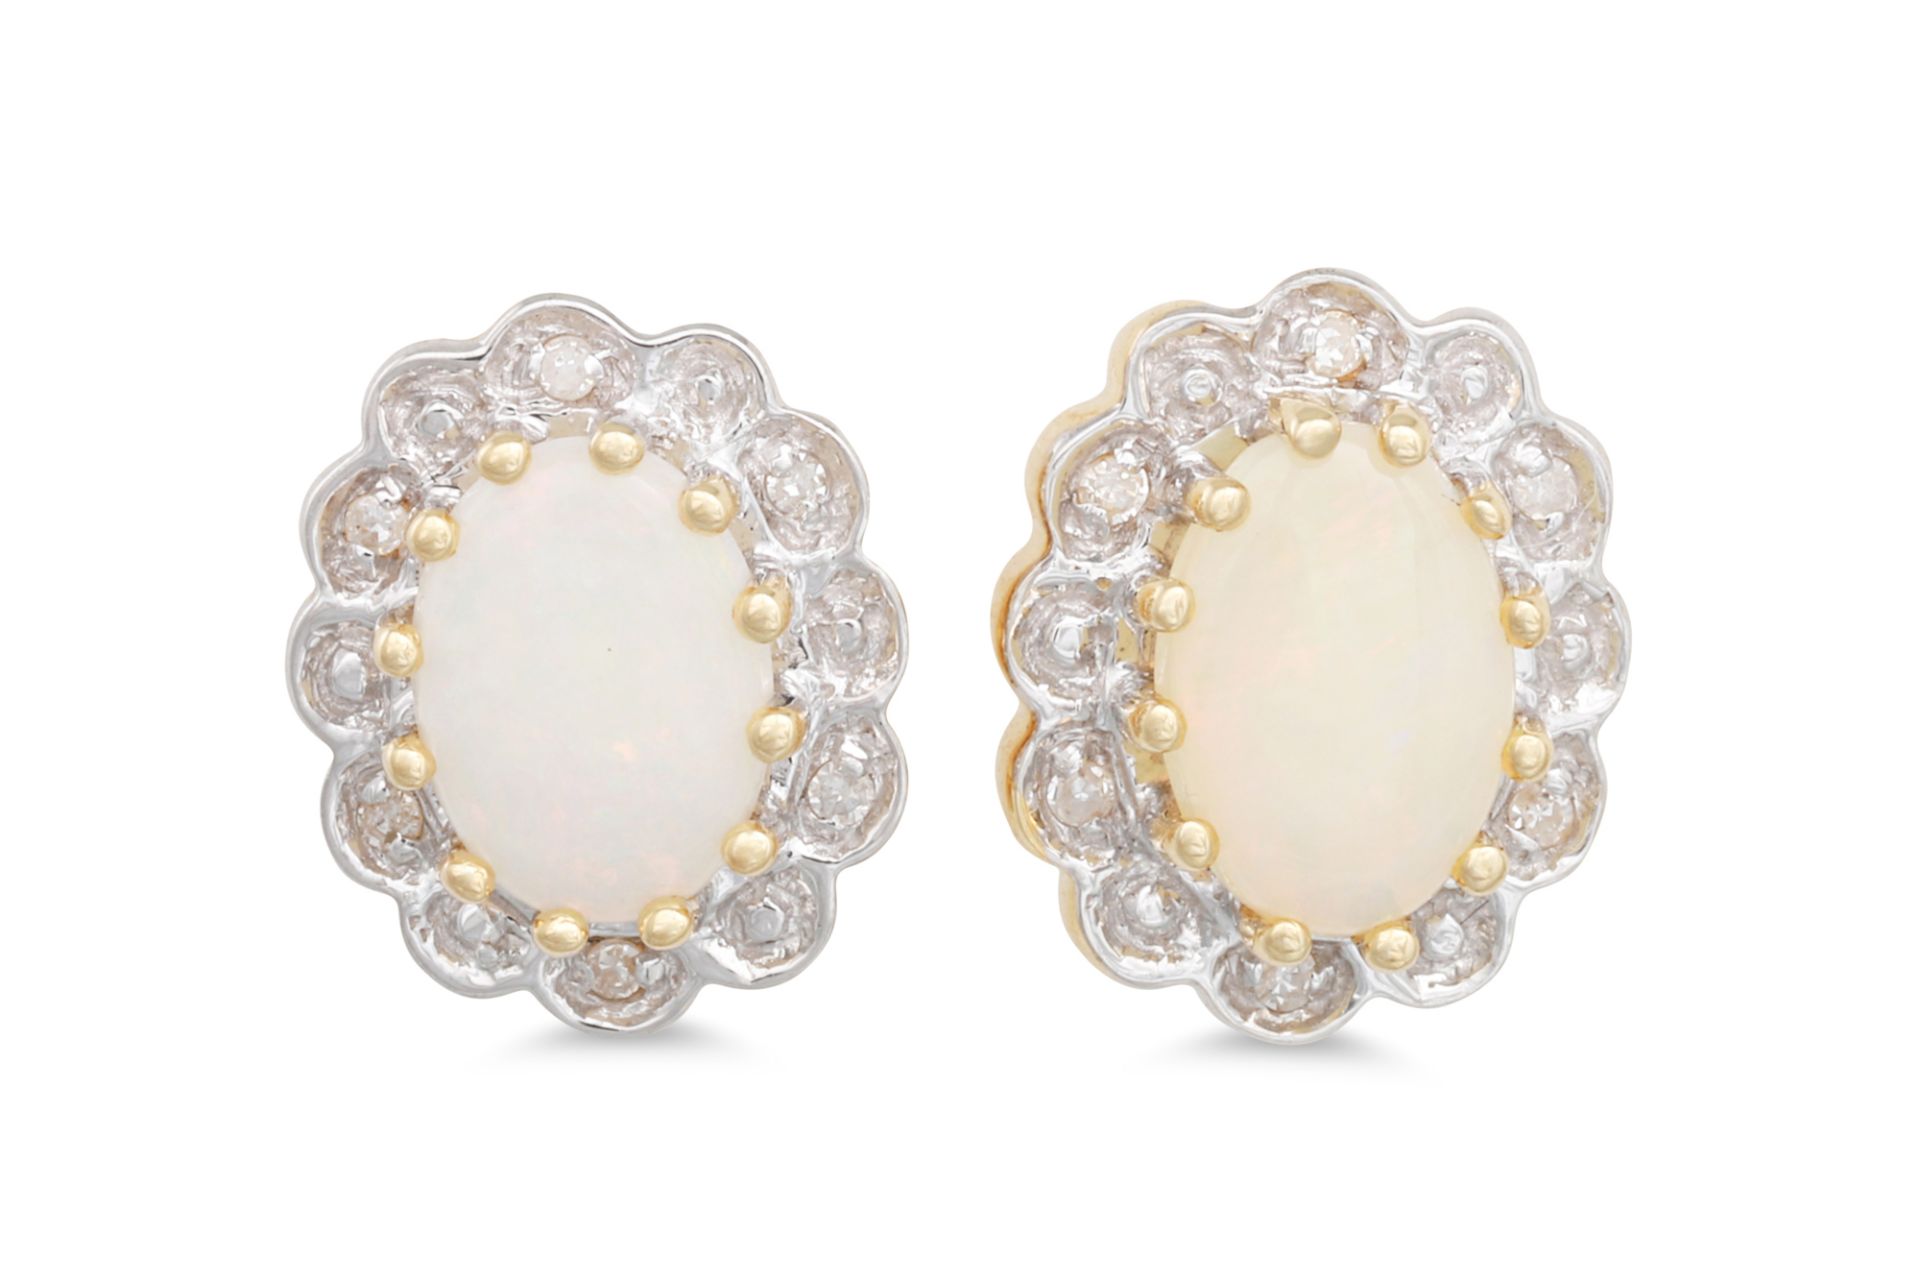 A PAIR OF OPAL AND DIAMOND CLUSTER EARRINGS, the oval opal to illusion set diamond surround, mounted